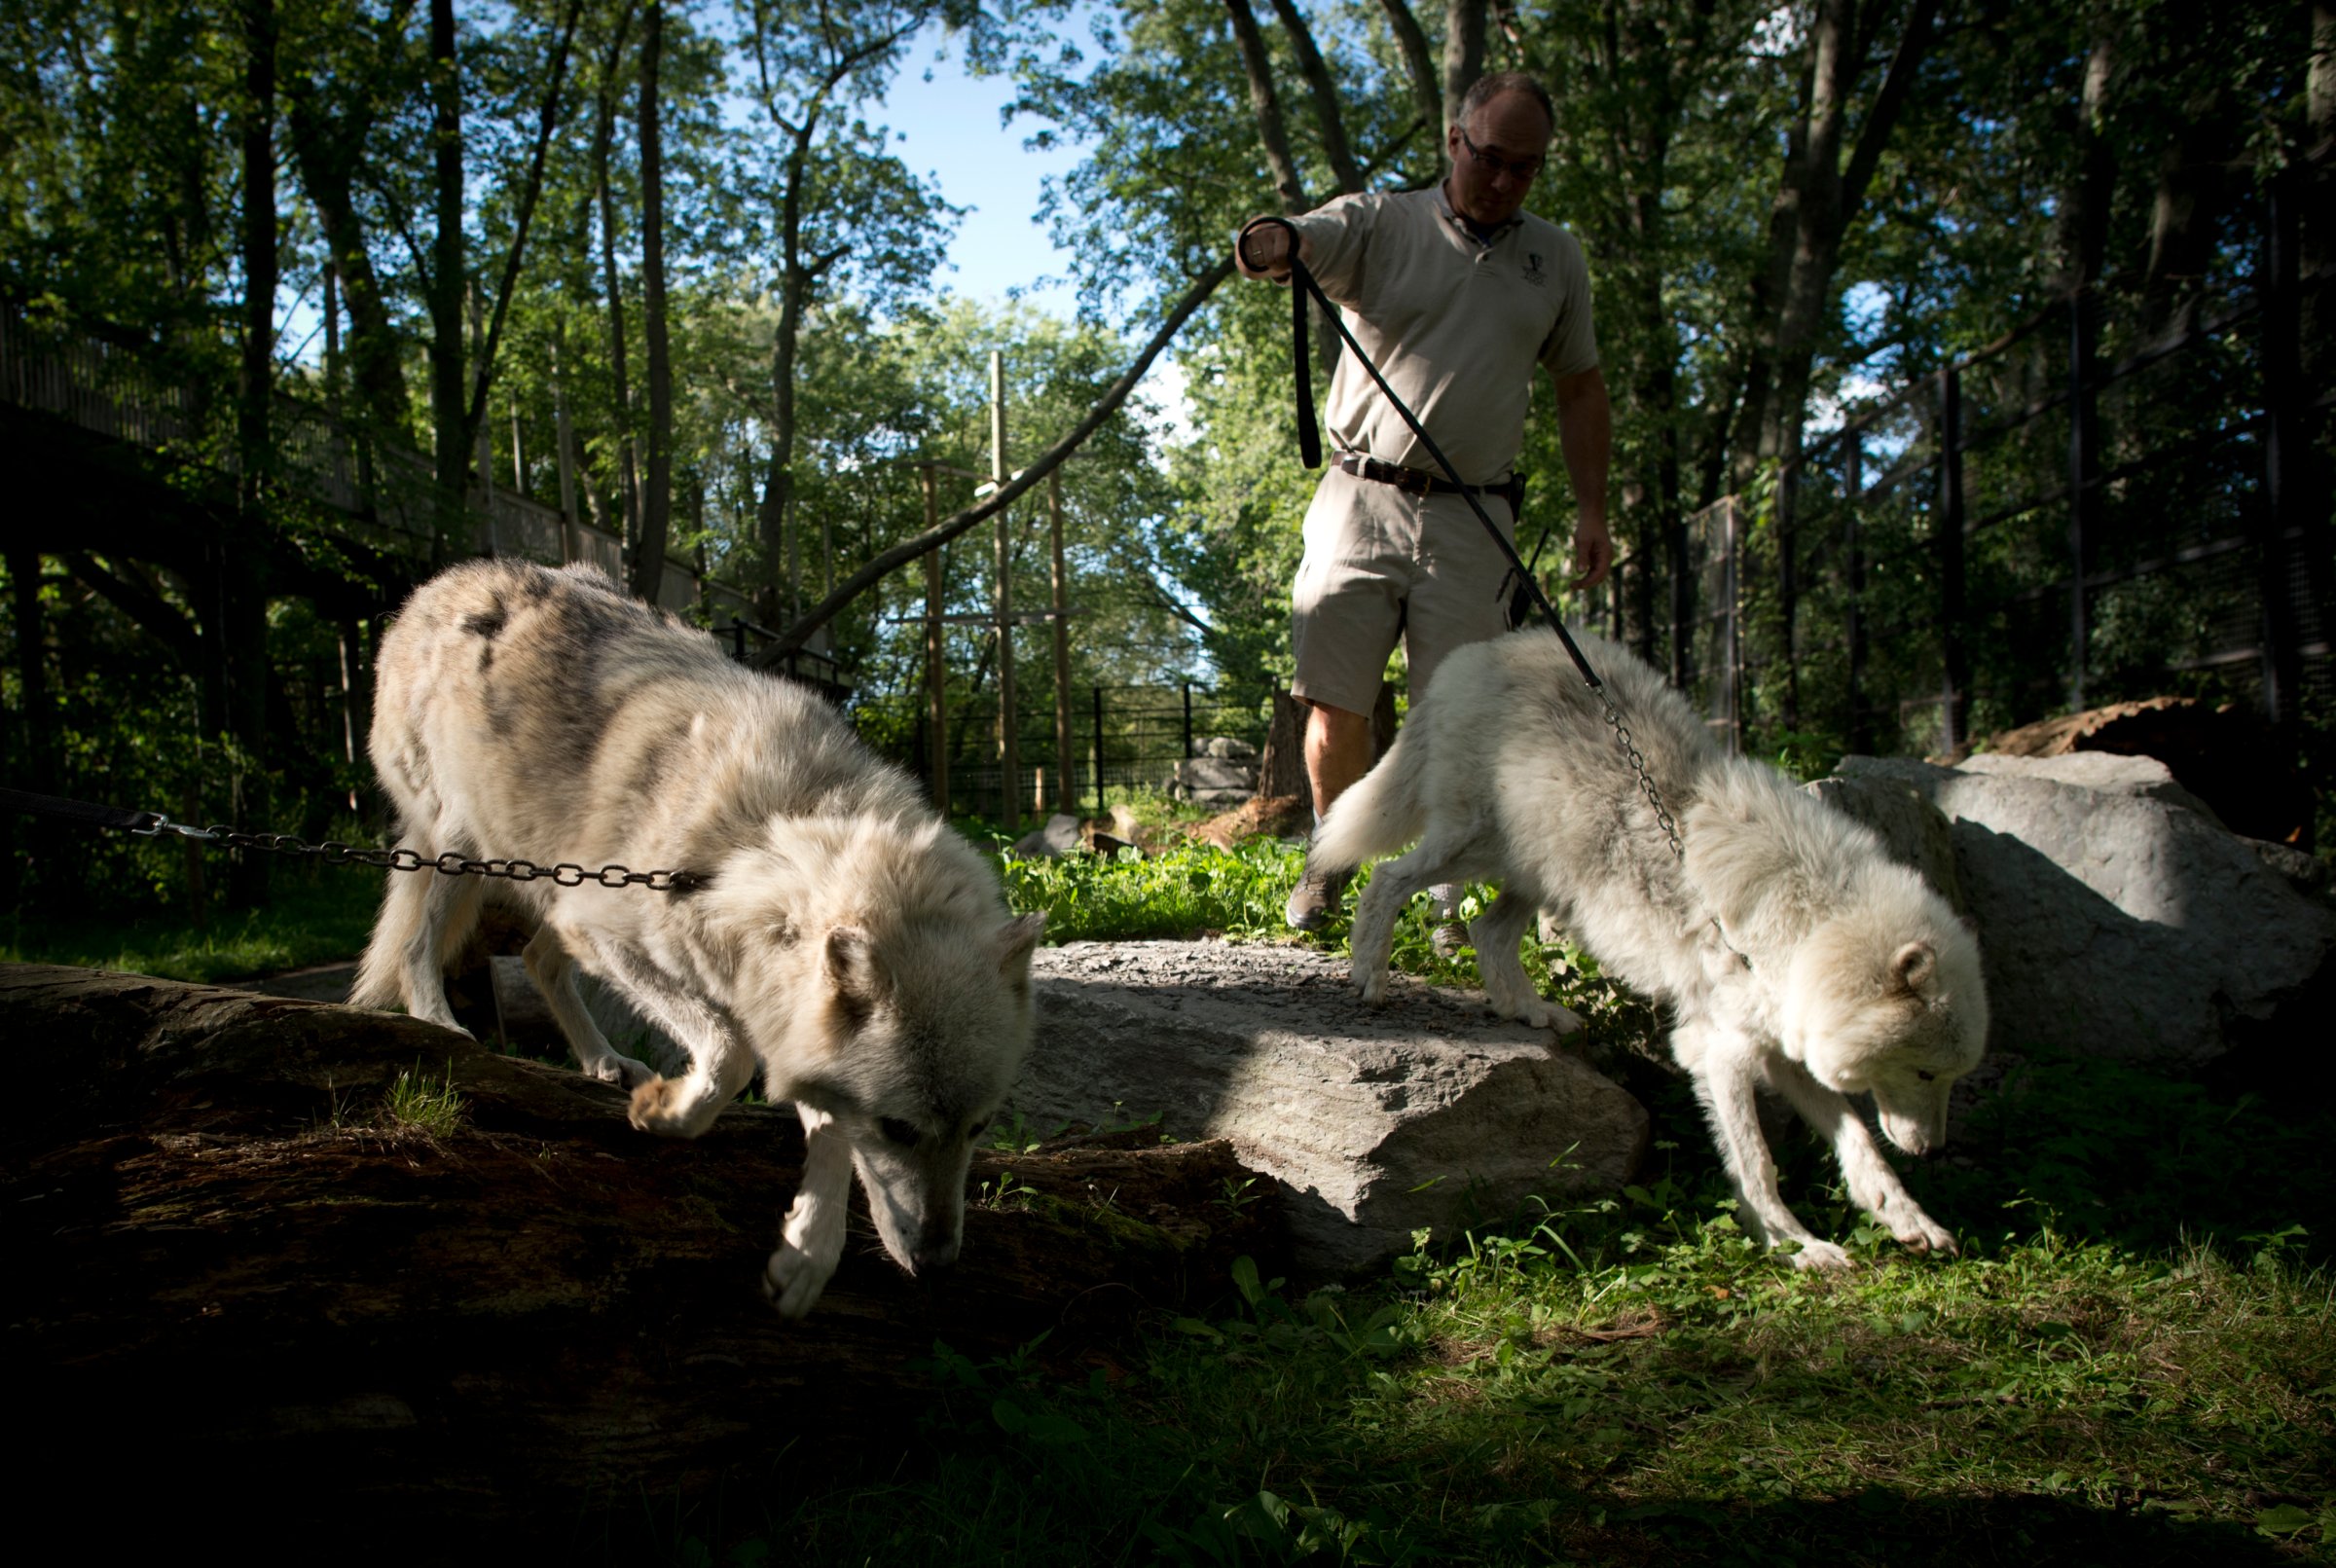 Michael Hackenberger transports an arctic wolf and a grey wolf their pen into the cat barn at the Bowmanville Zoo, August 17, 2012.